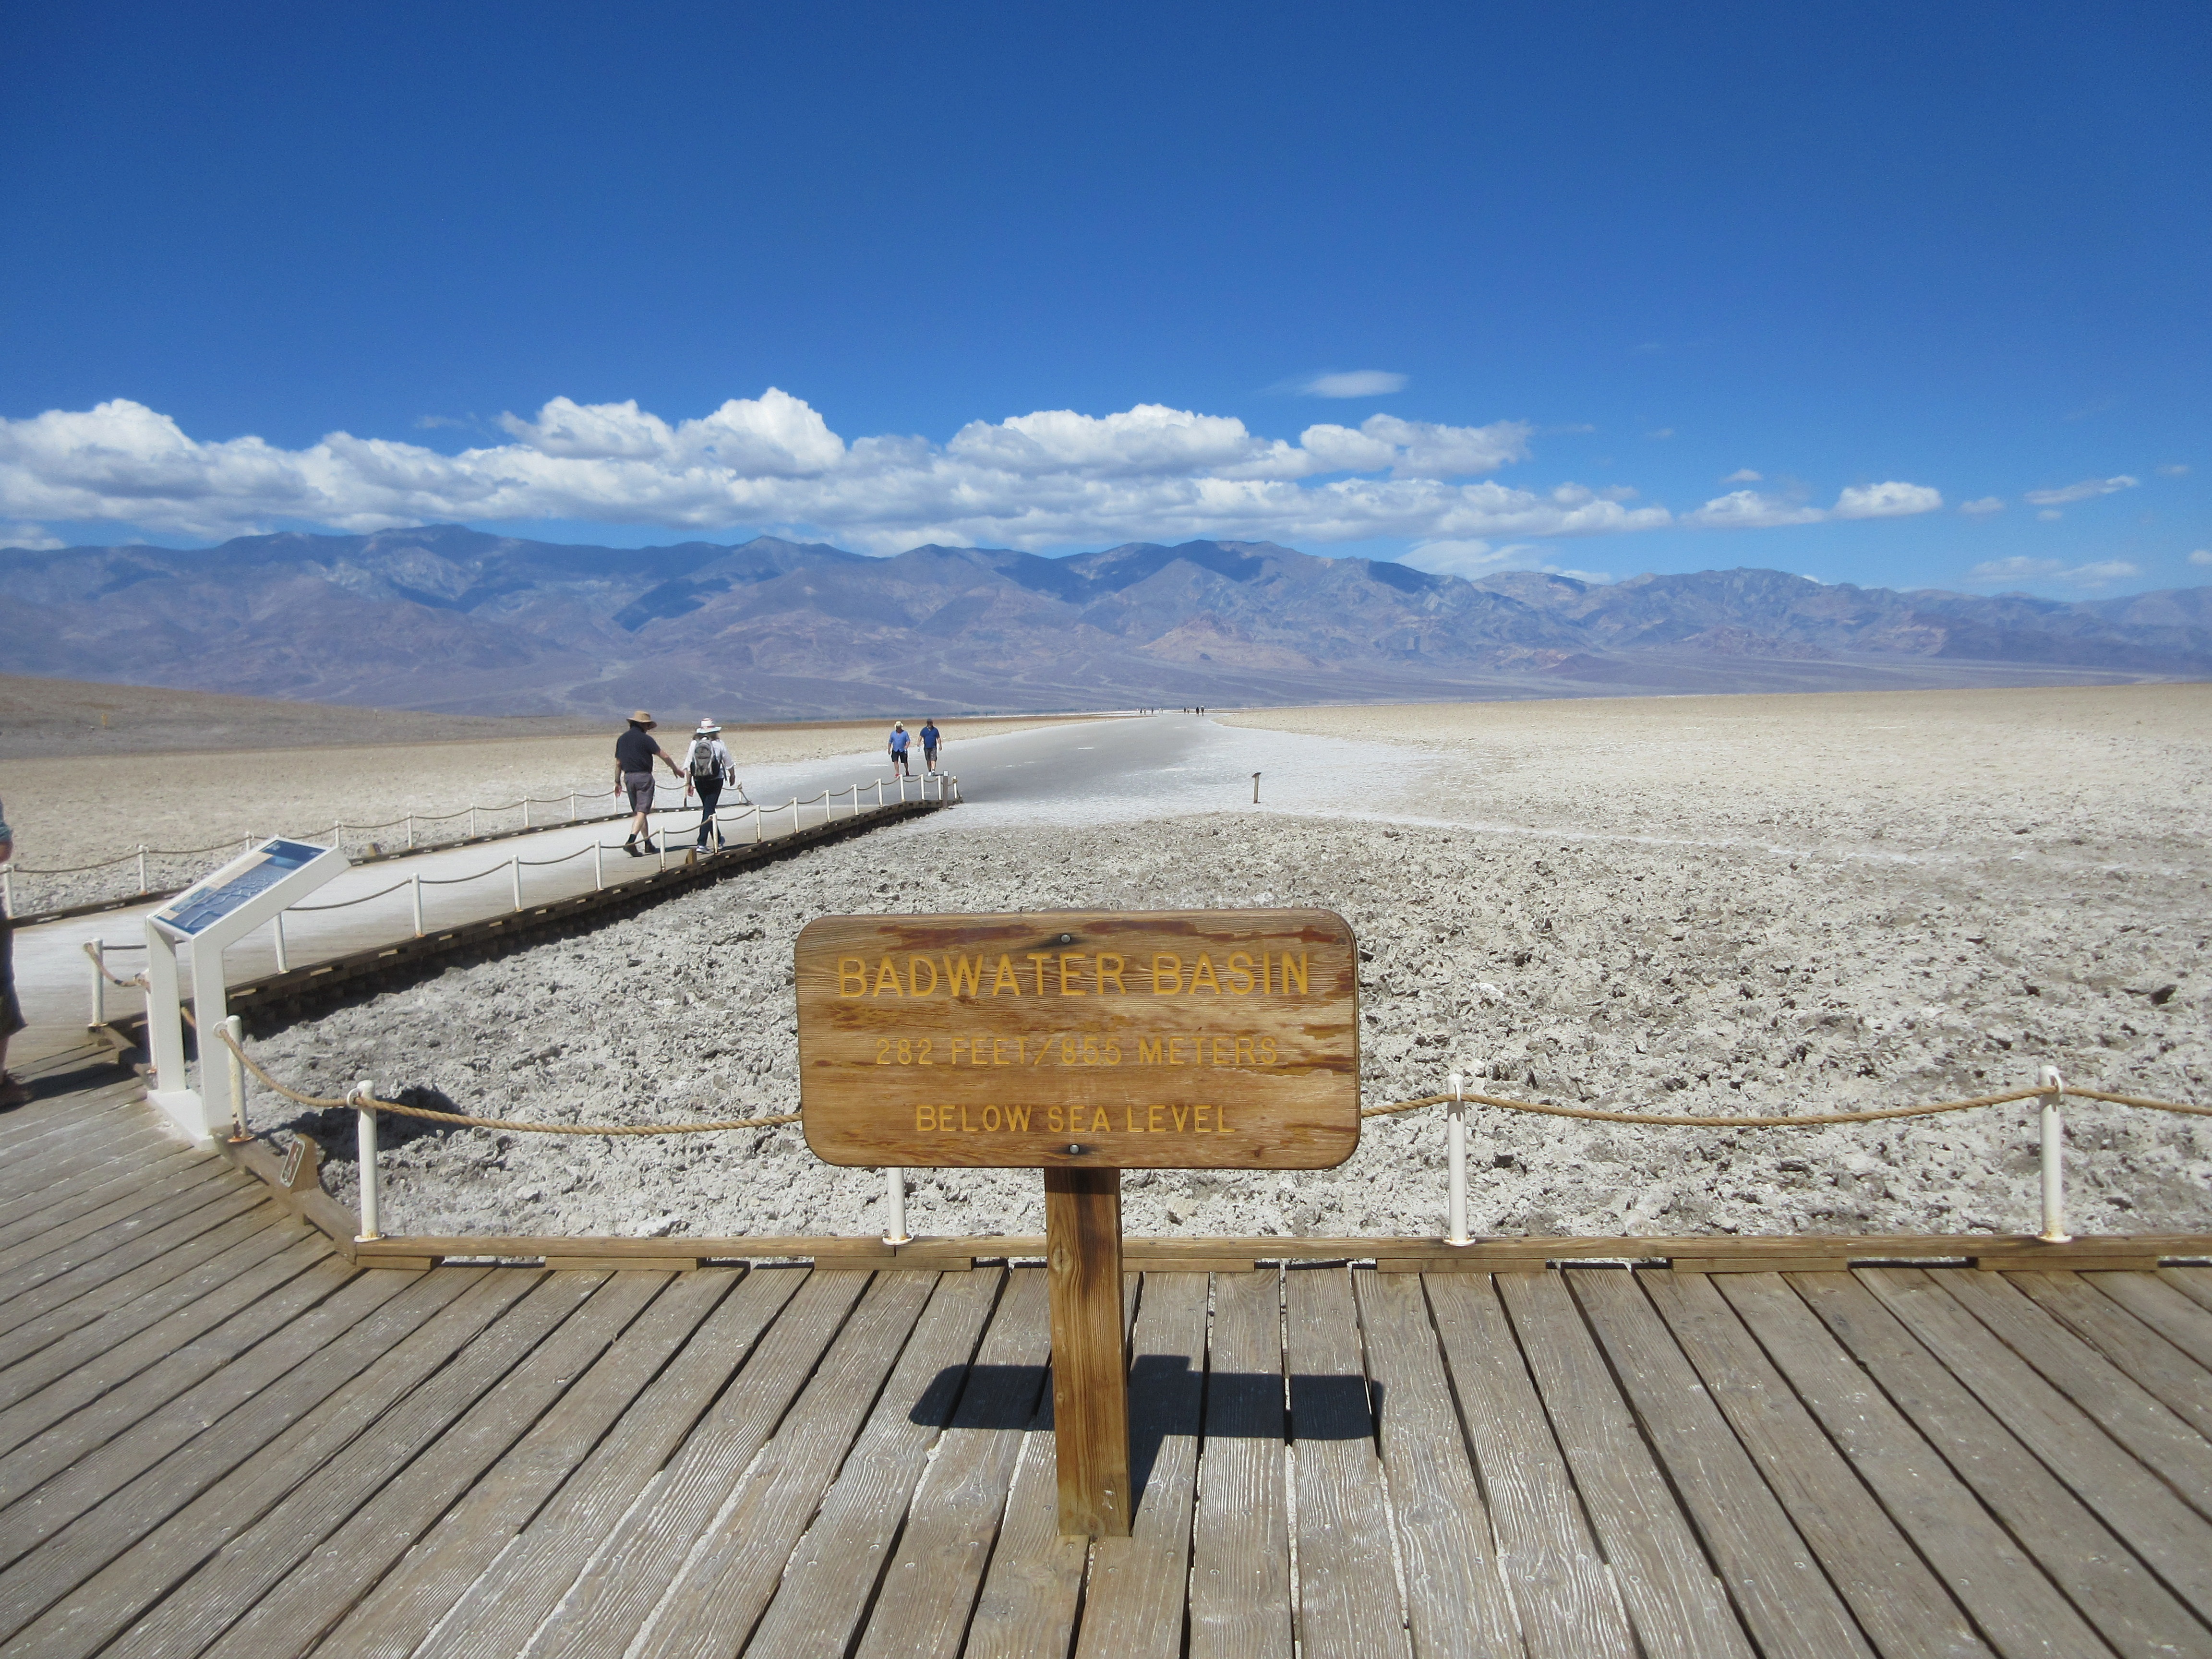 Badwater Basin Basin, lowest point in the U.S.